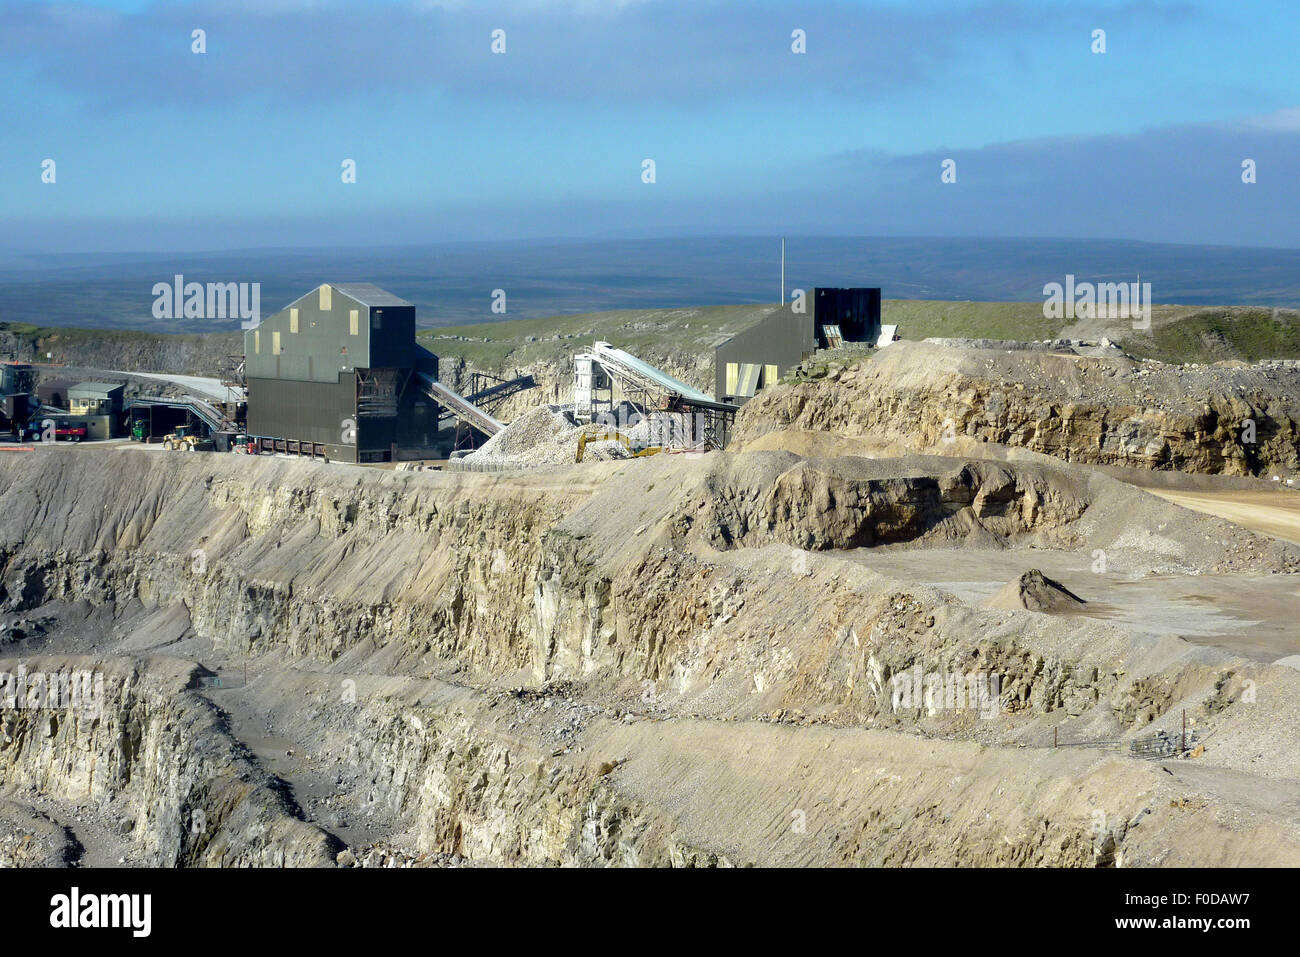 View of stone quarry showing mining equipment. Stock Photo